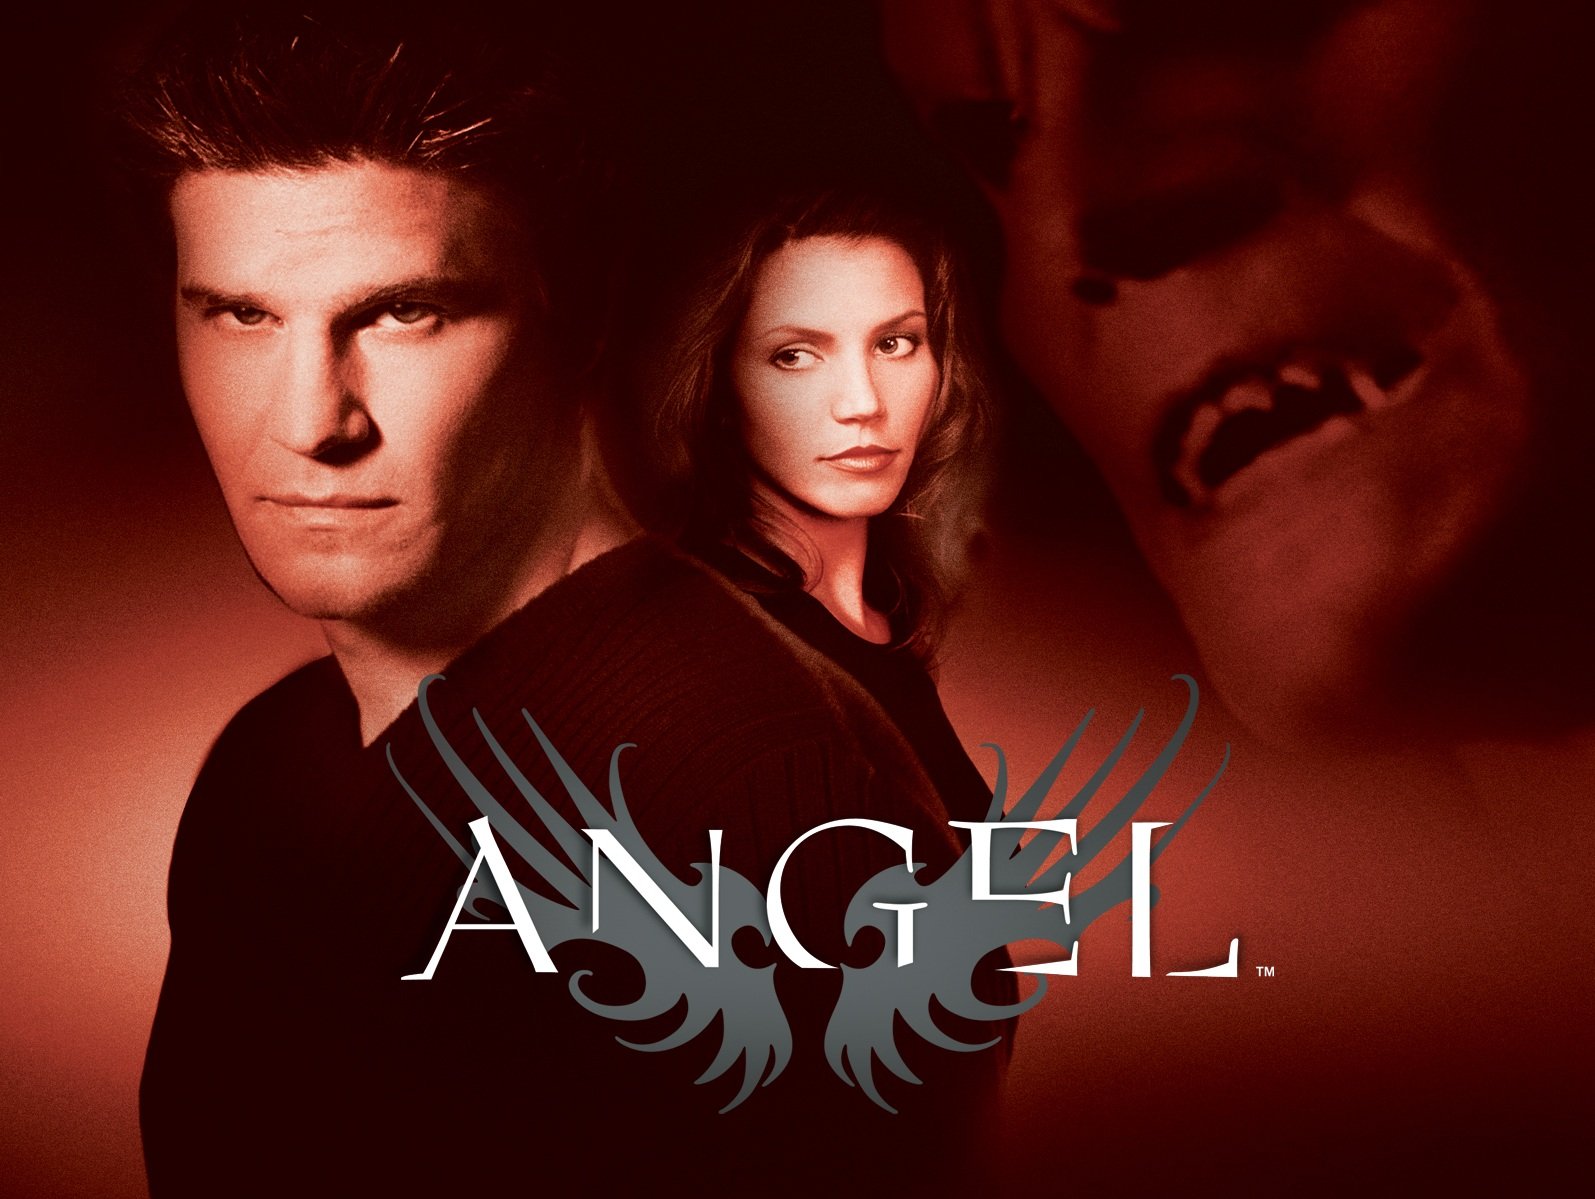 The Angel season 1 DVD cover, with Angel brooding into the camera. Cordelia stands slightly behind him, while an Olan Mills-esque floating image of Angel's vamp face is in the upper right corner.